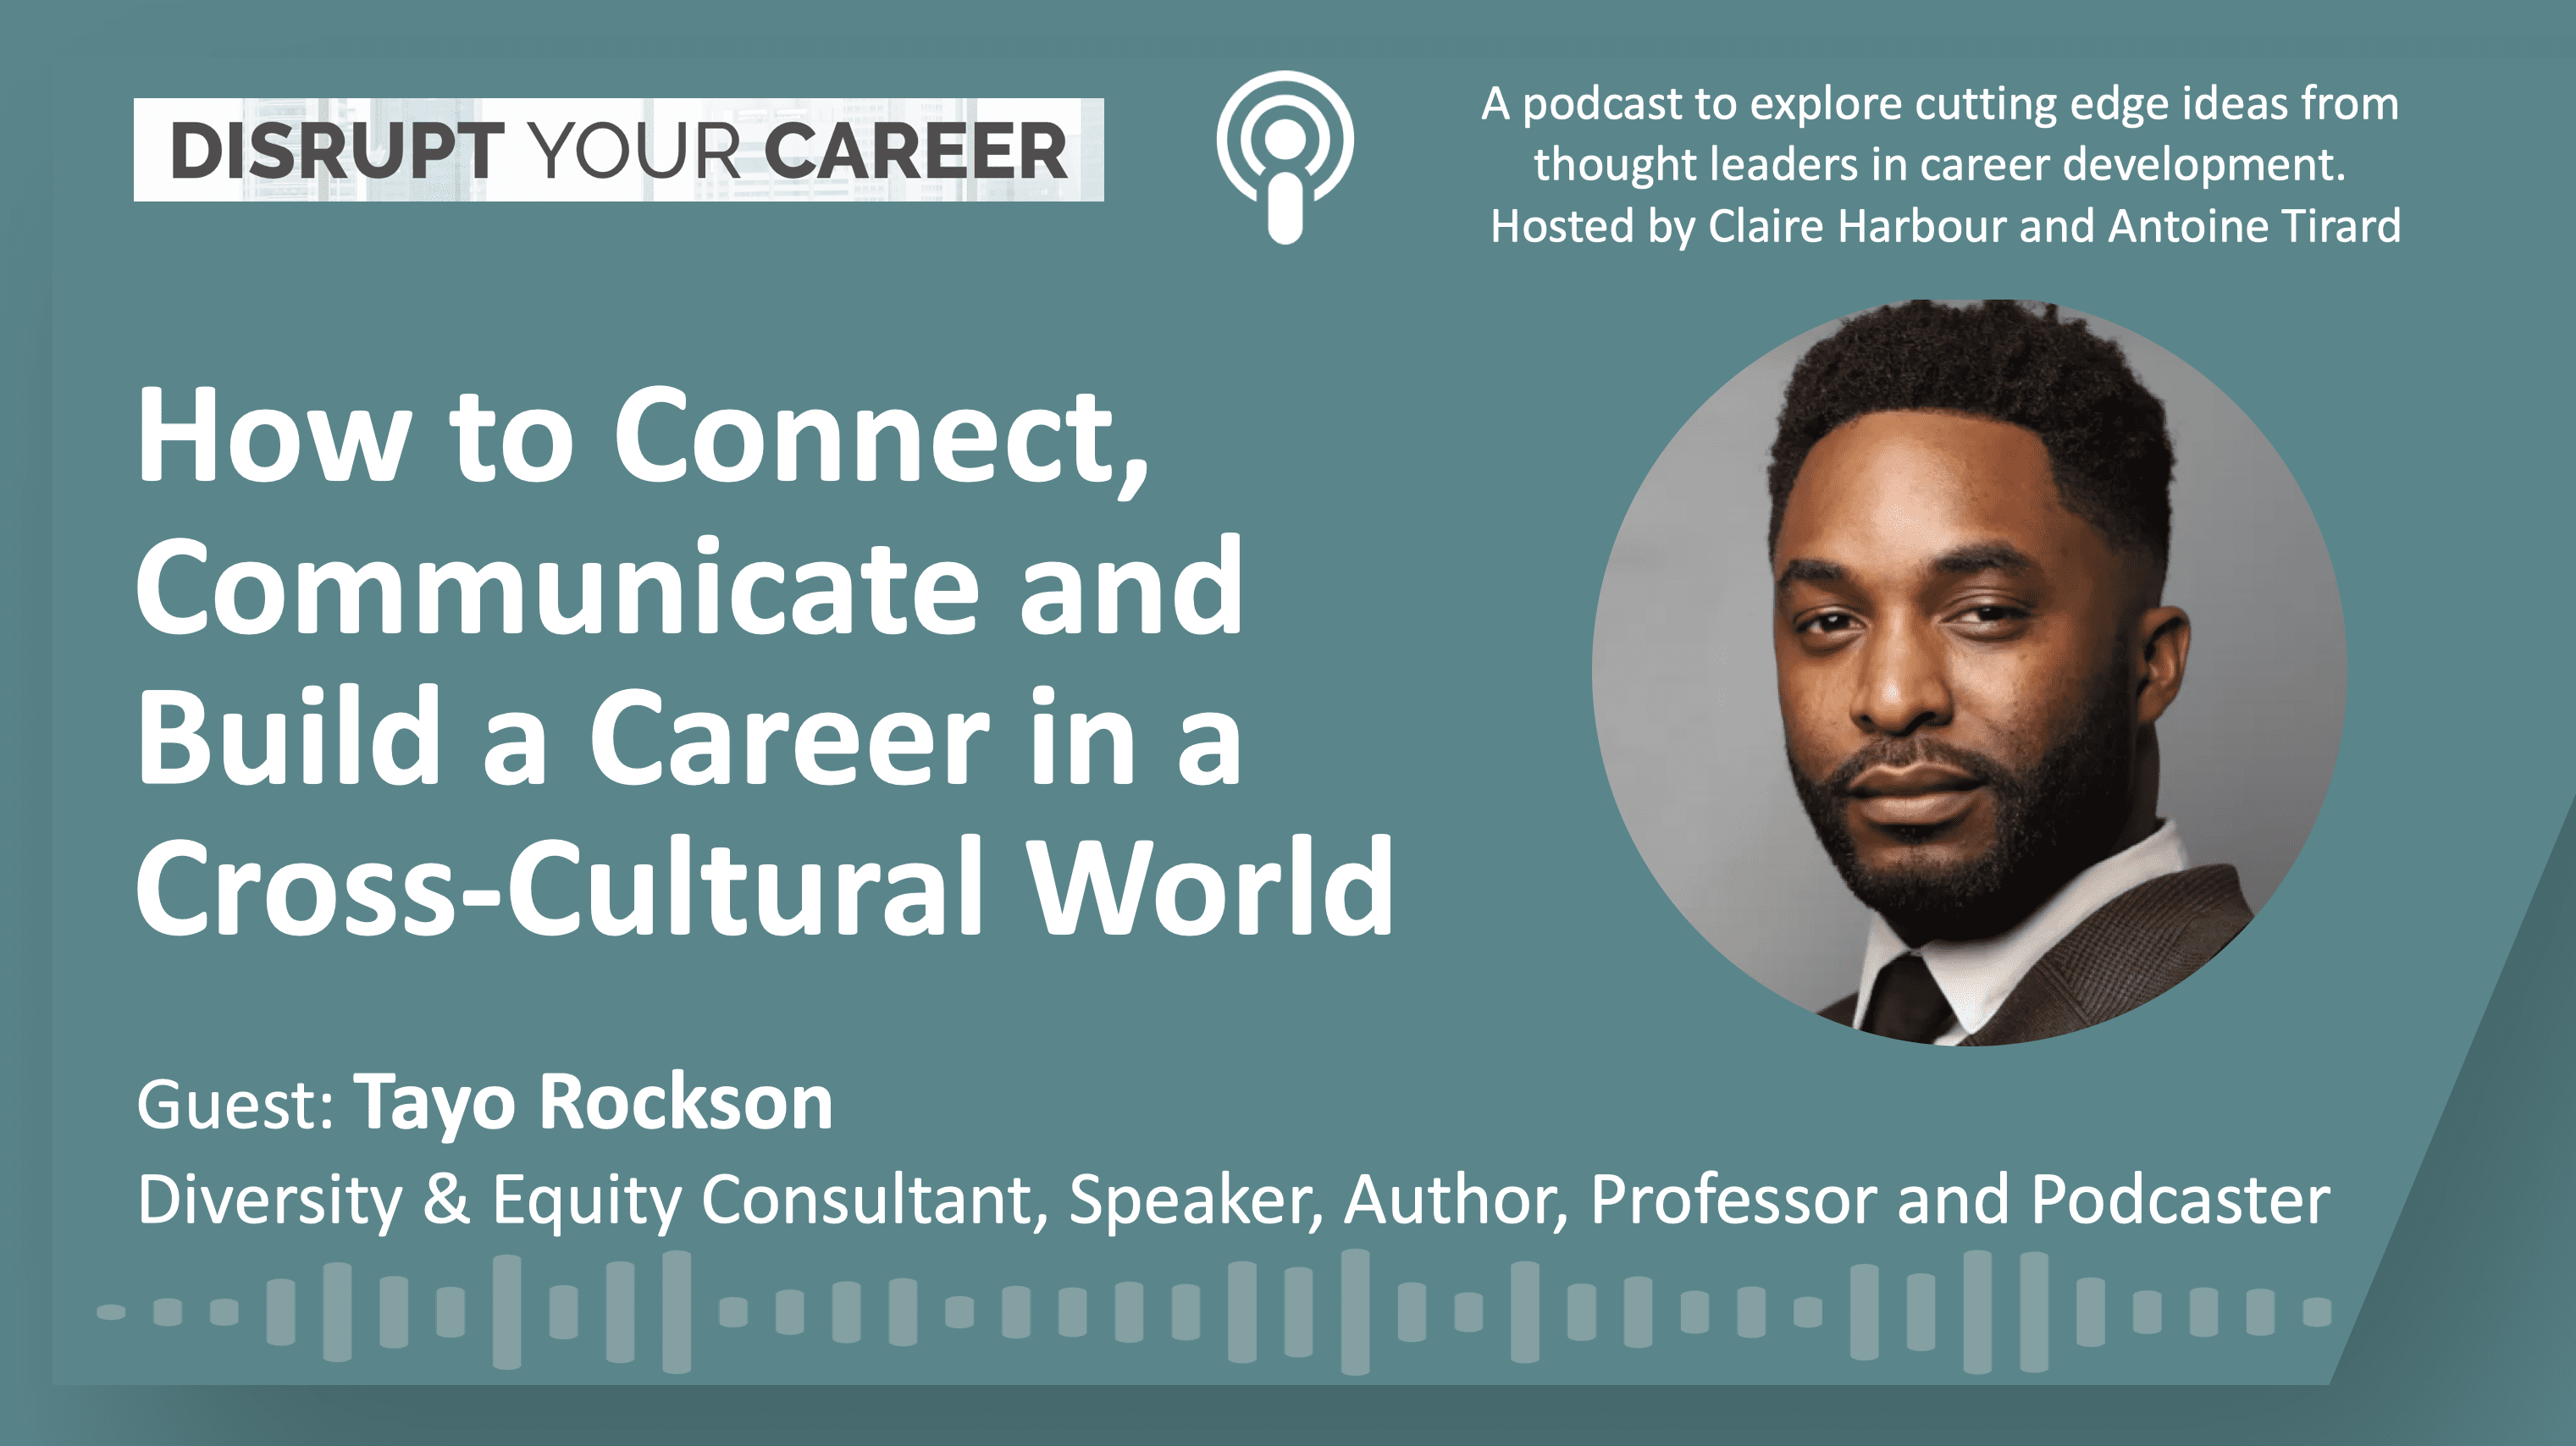 How to Connect, Communicate and Build a Career in a Cross-Cultural World